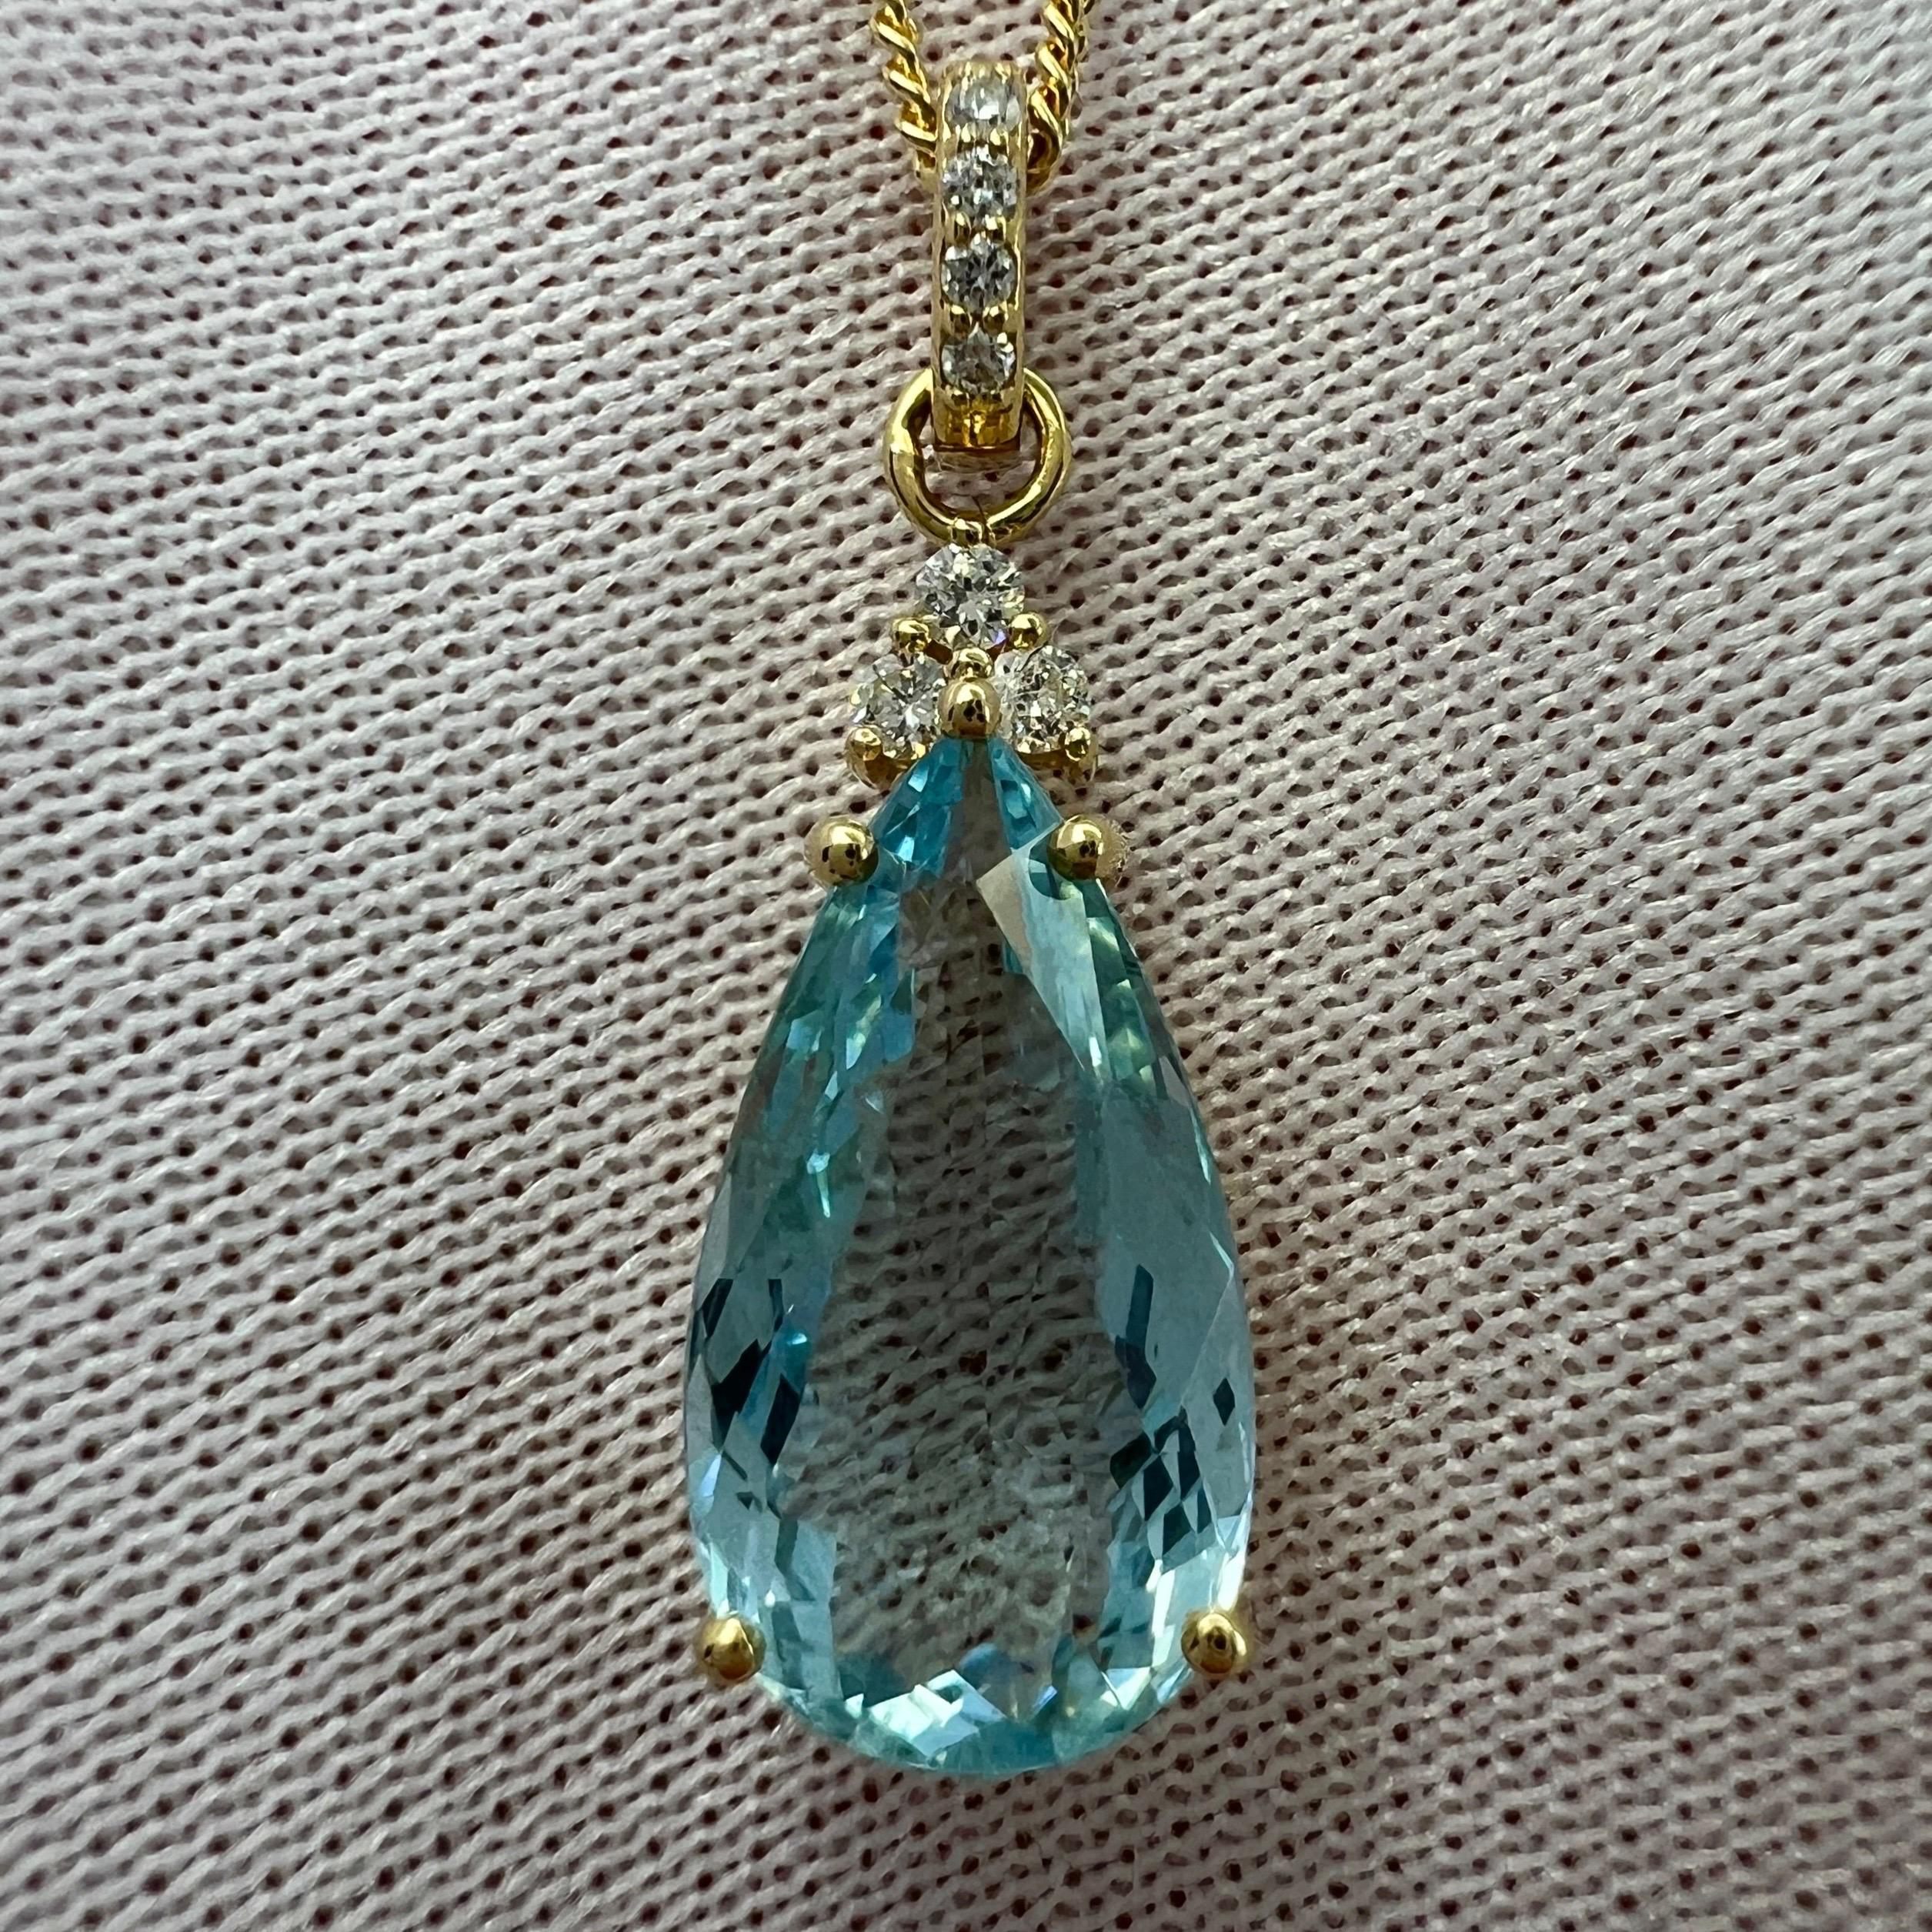 Natural Blue Aquamarine And Diamond 18k Yellow Gold Pendant Necklace.

2.50 Carat aquamarine with a stunning vivid blue colour and an excellent pear teardrop cut showing lots of brightness and light return. Also has excellent clarity, a very clean